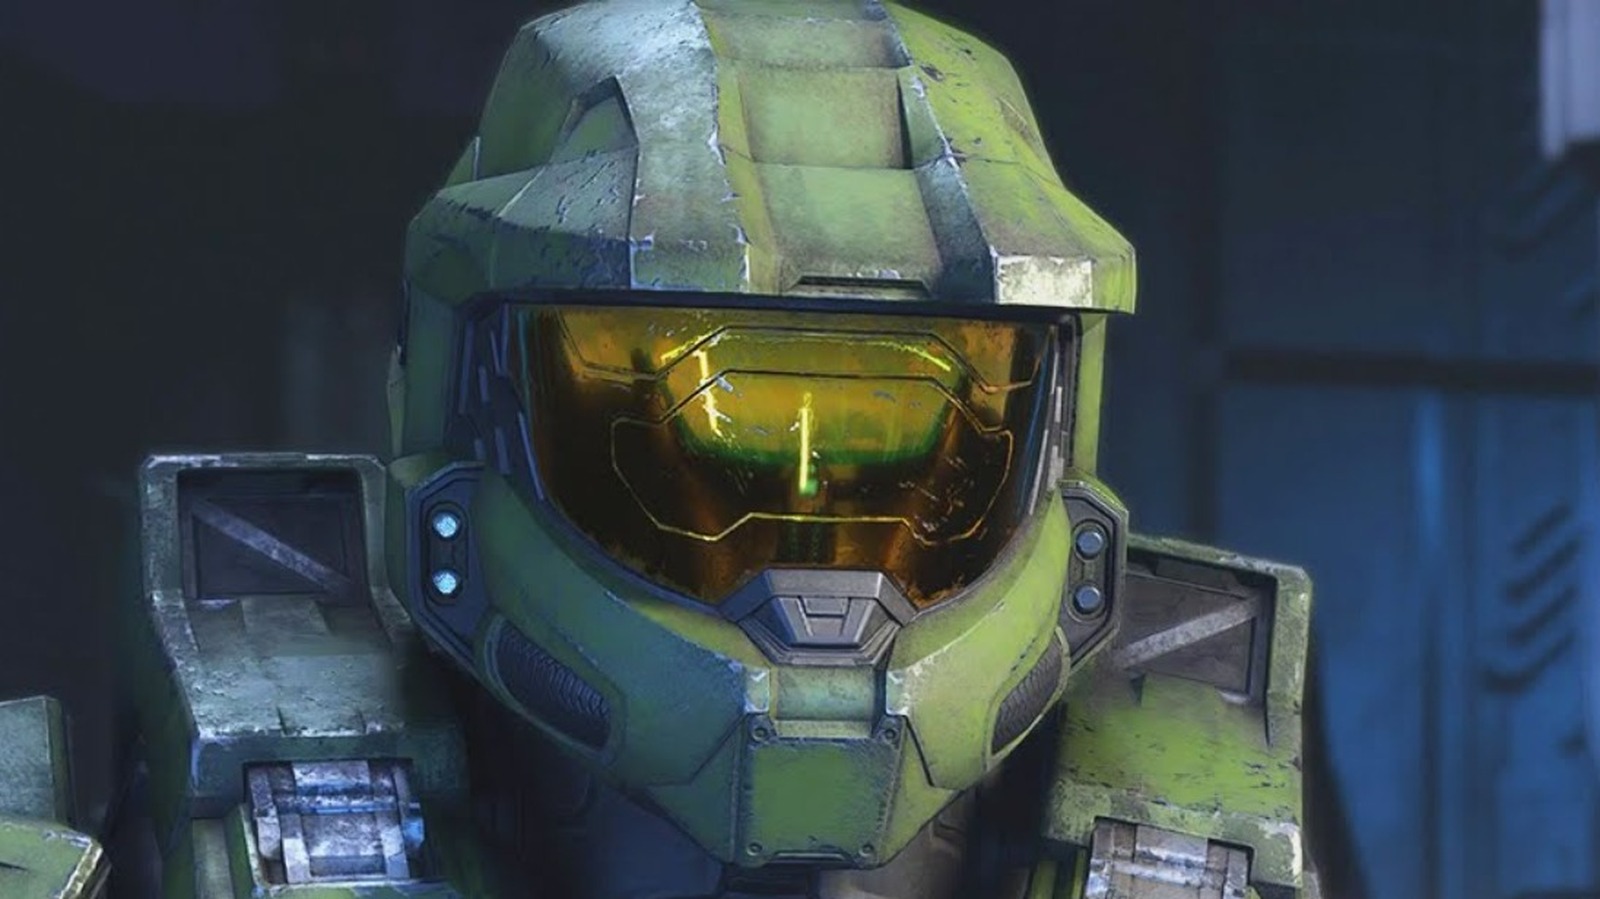 10 Canon Facts About Halo And Master Chief That Aren't In The